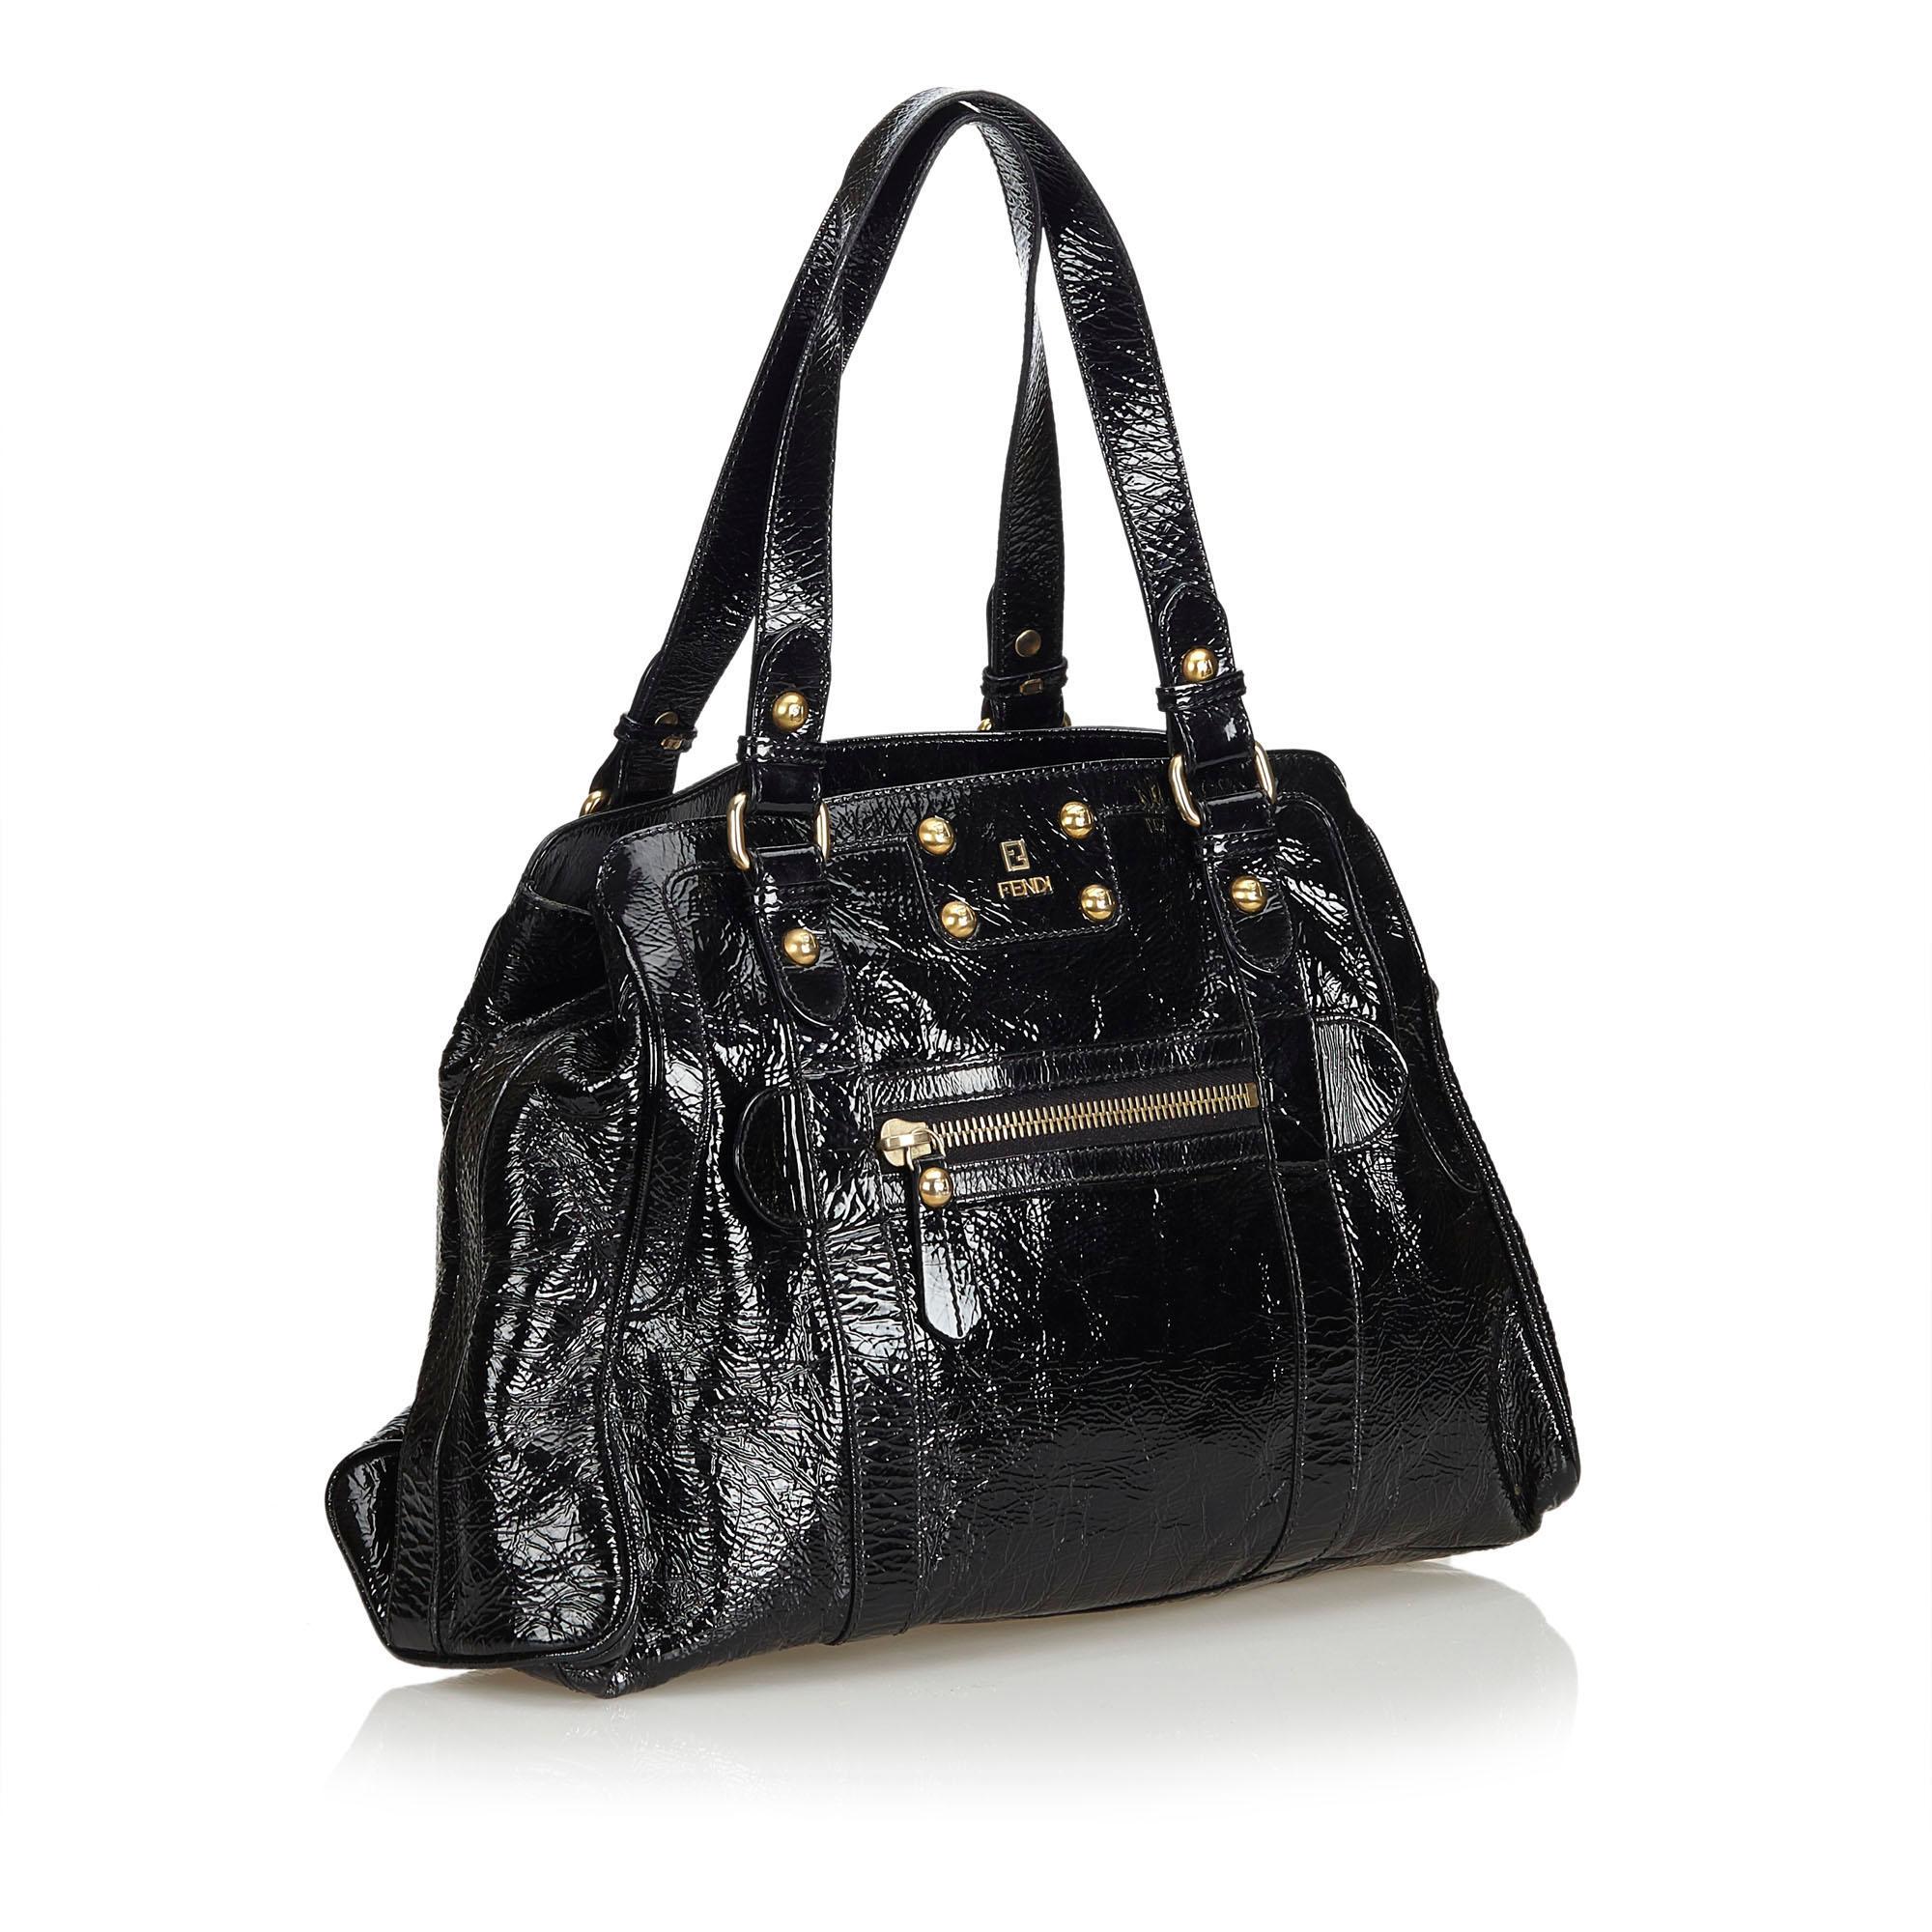 The Du Jour Tote features a patent leather body, front exterior zip pocket, flat leather handles, an open top, and interior zip pocket. It carries as B condition rating.

Inclusions: 
This item does not come with inclusions.

Dimensions:
Length: